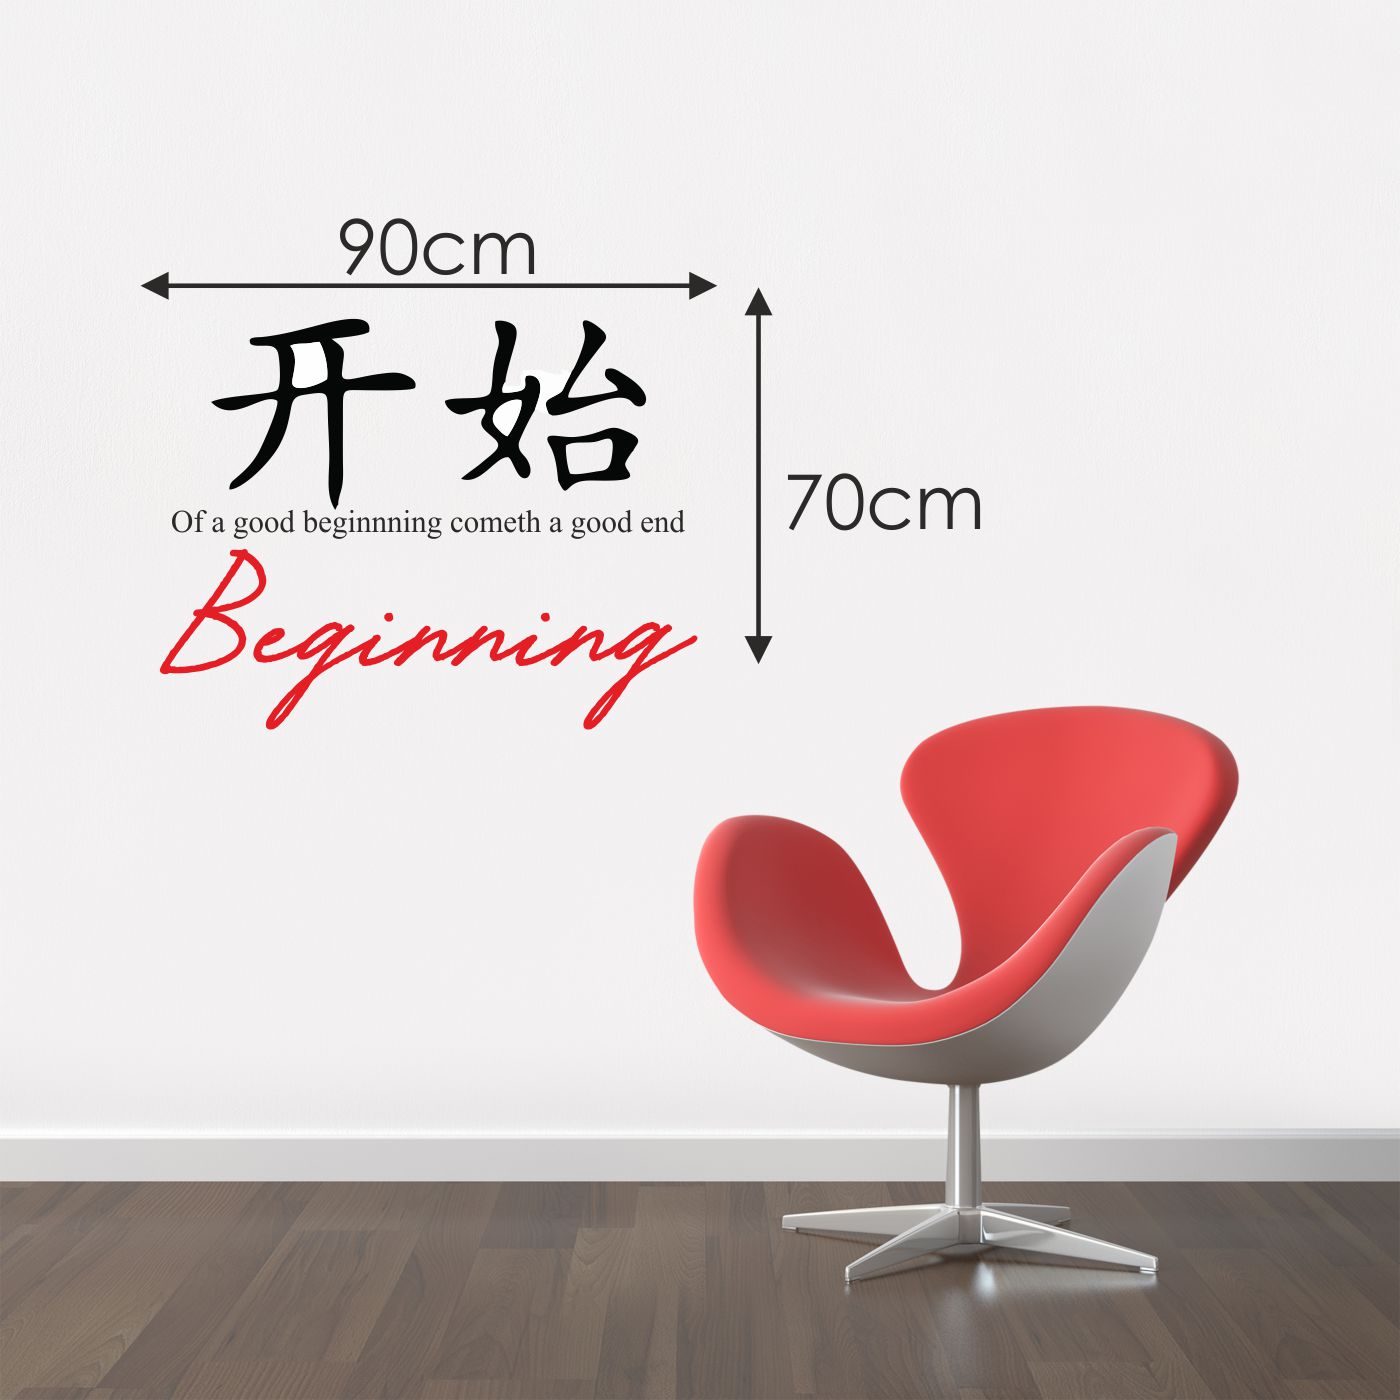 ORKA Chinese Wall Decal Sticker 24  